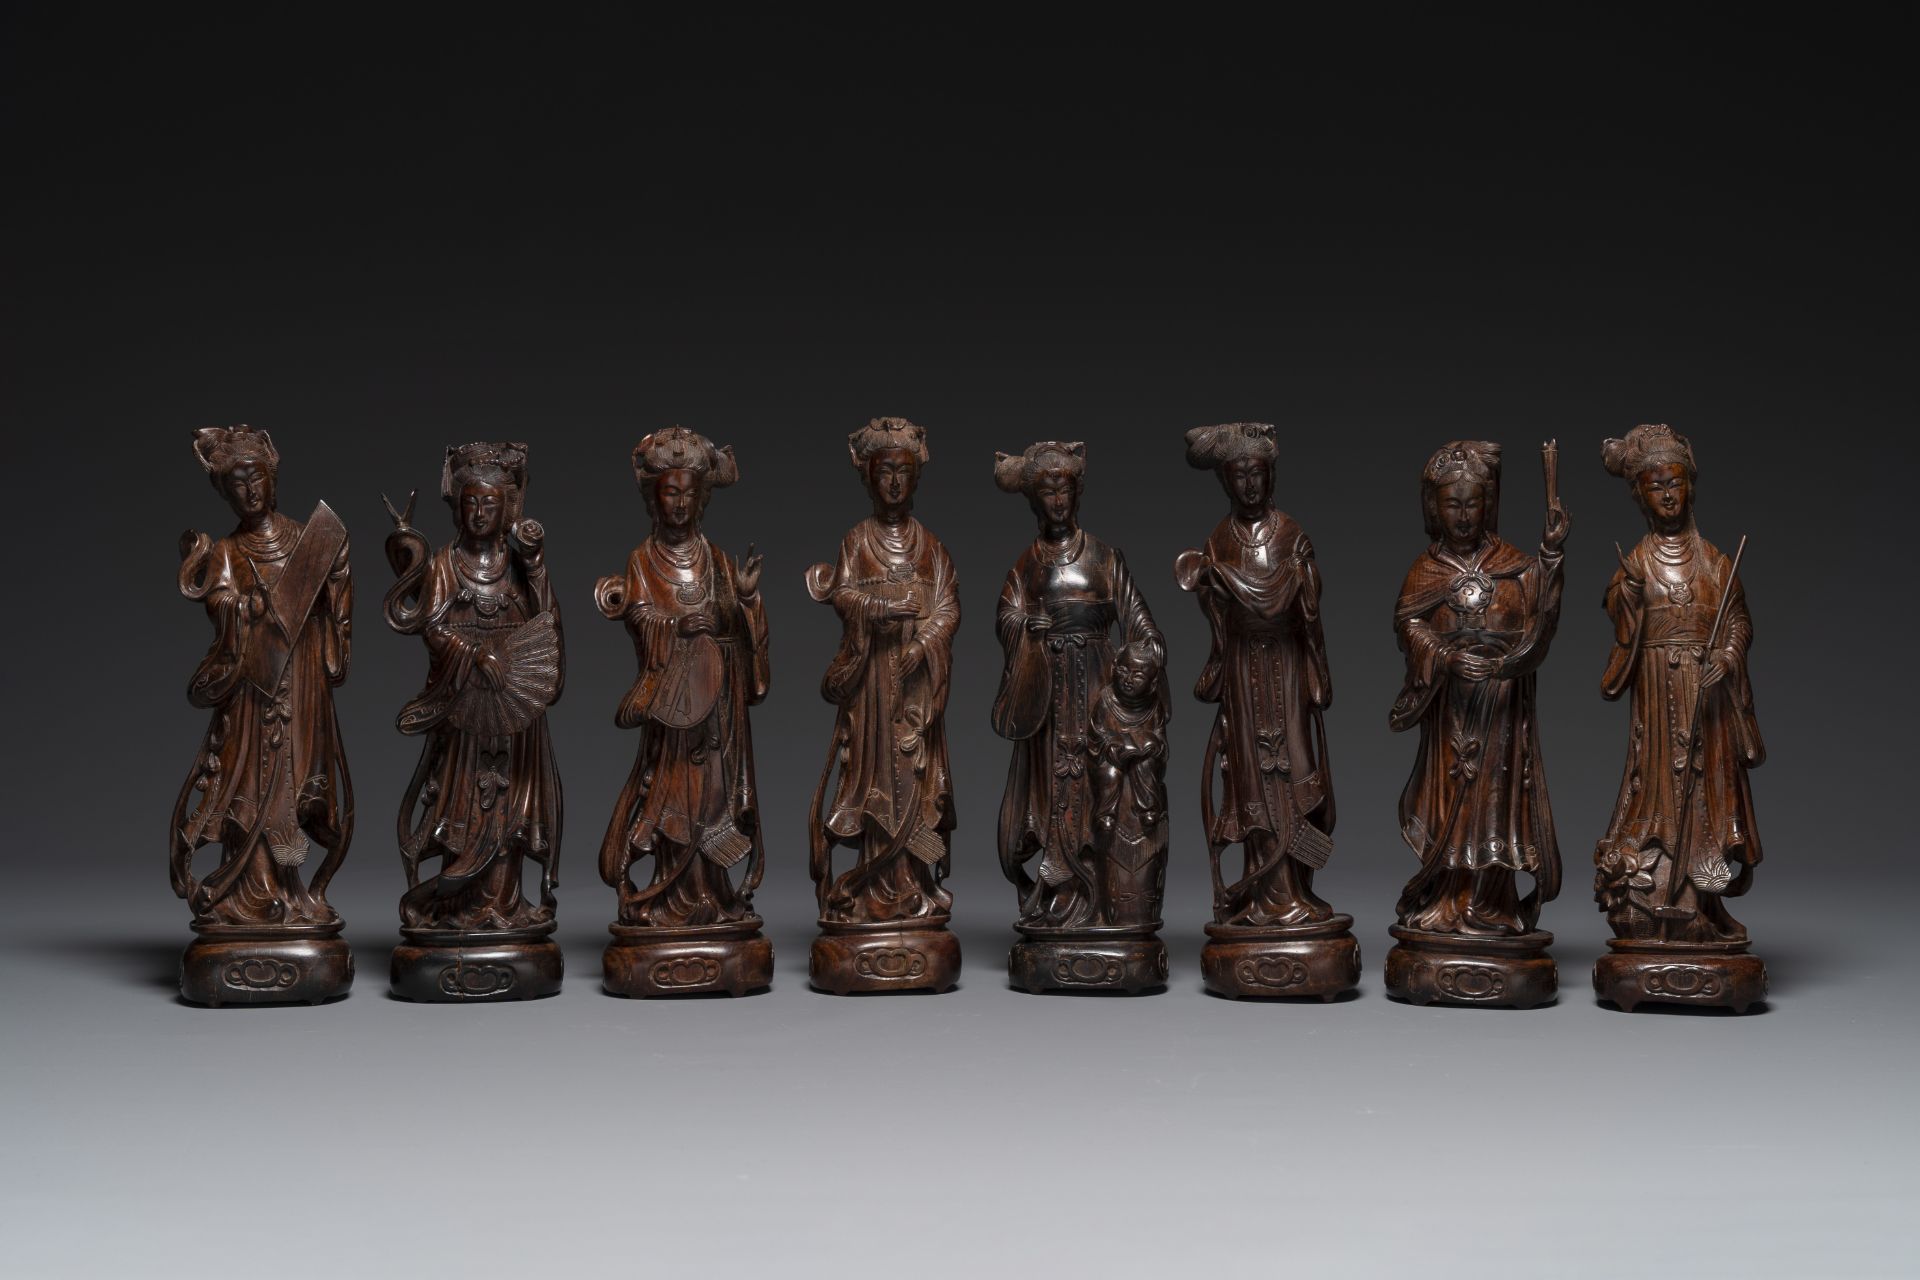 Eight Chinese wooden sculptures of female deities, 19th C.